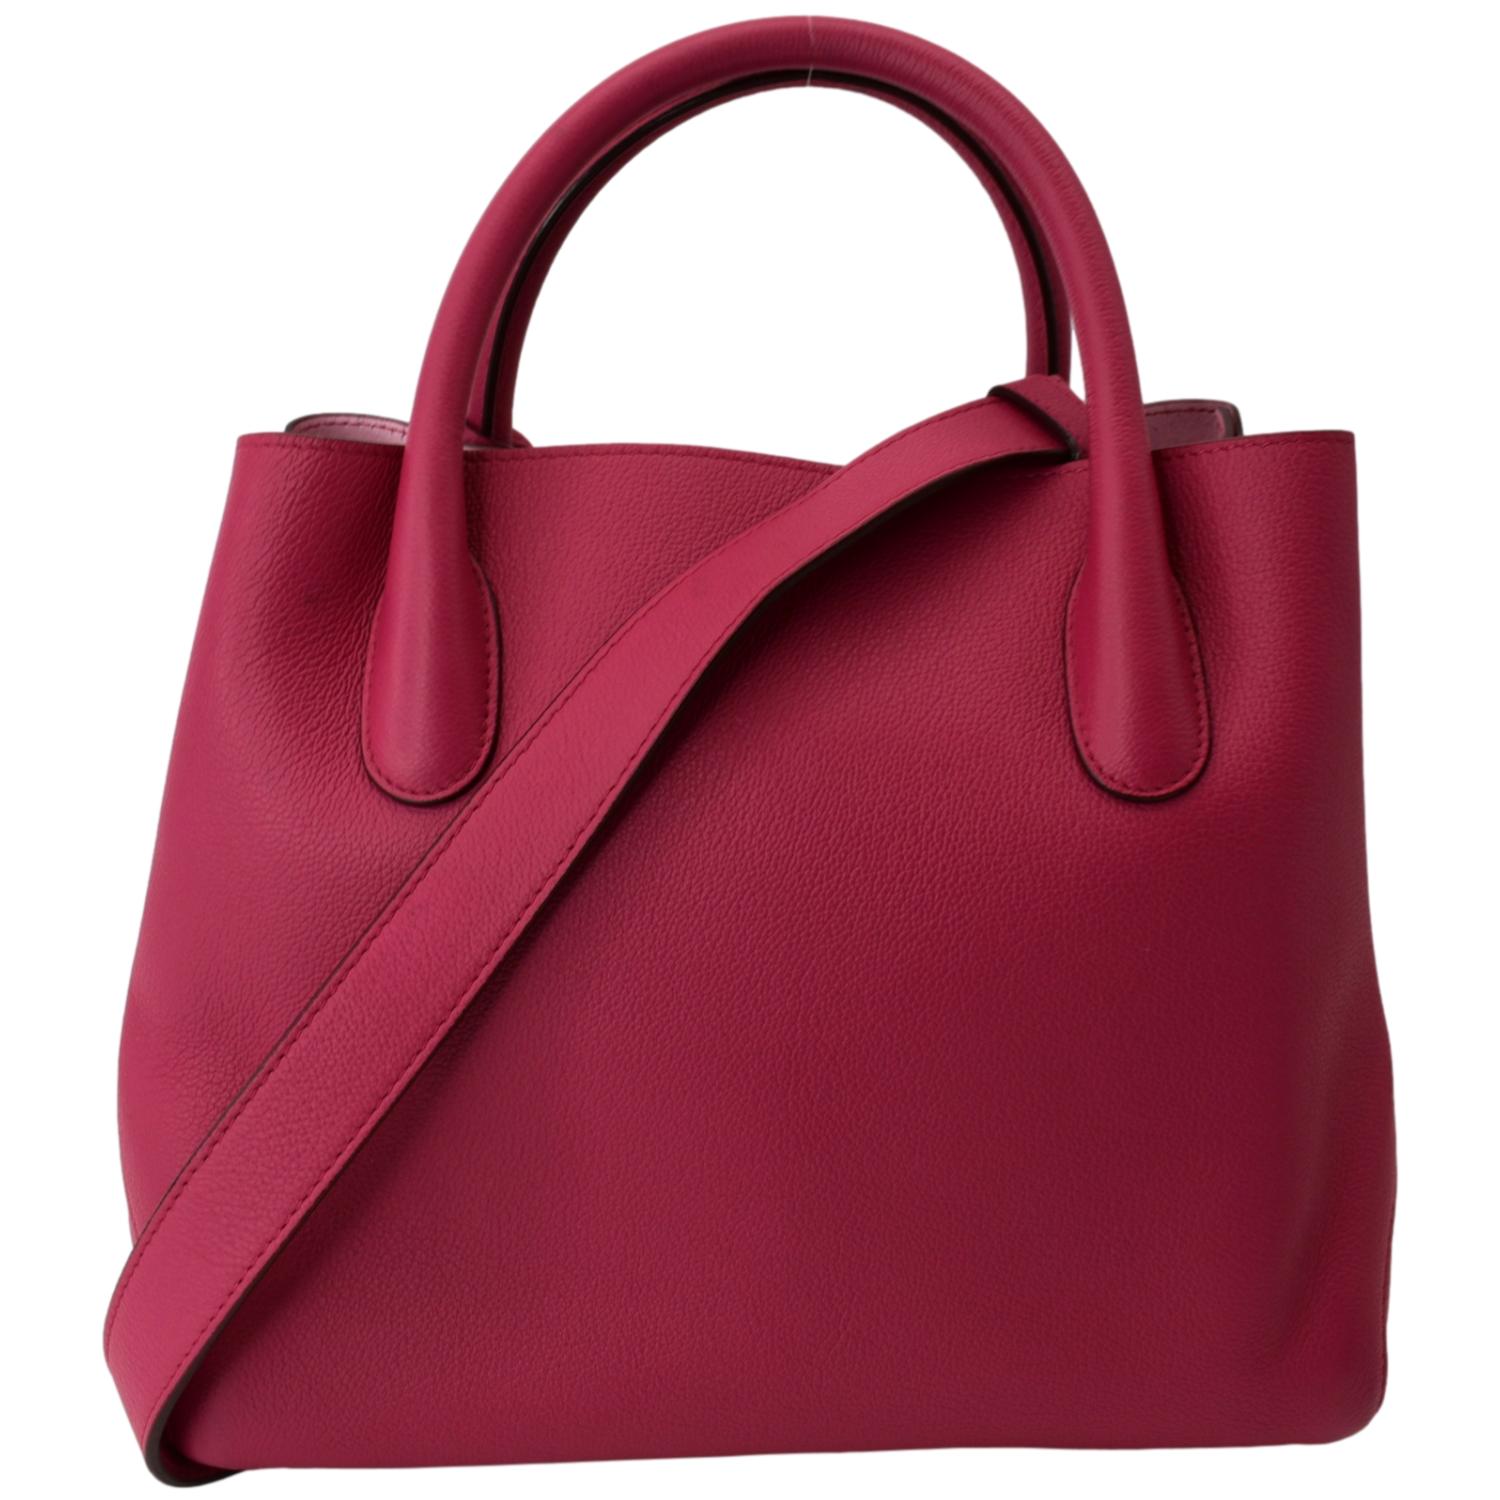 Christian Dior Open Bar Grained Leather Tote Bag Pink